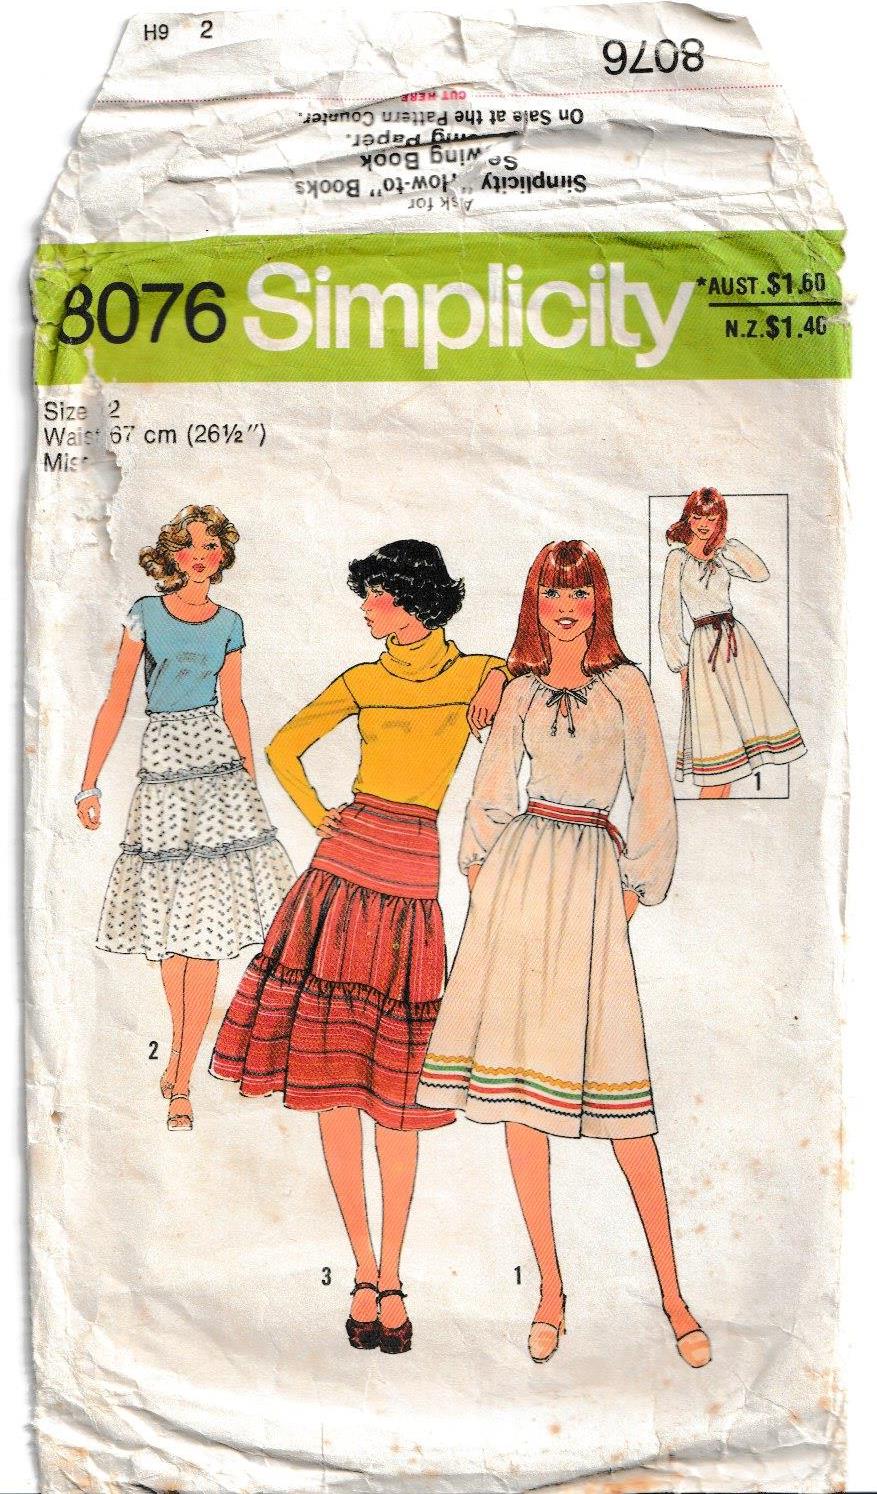 Tiered Skirt & Wrap Skirt - Small - Vintage Pattern - Simplicity 8076 - 1977